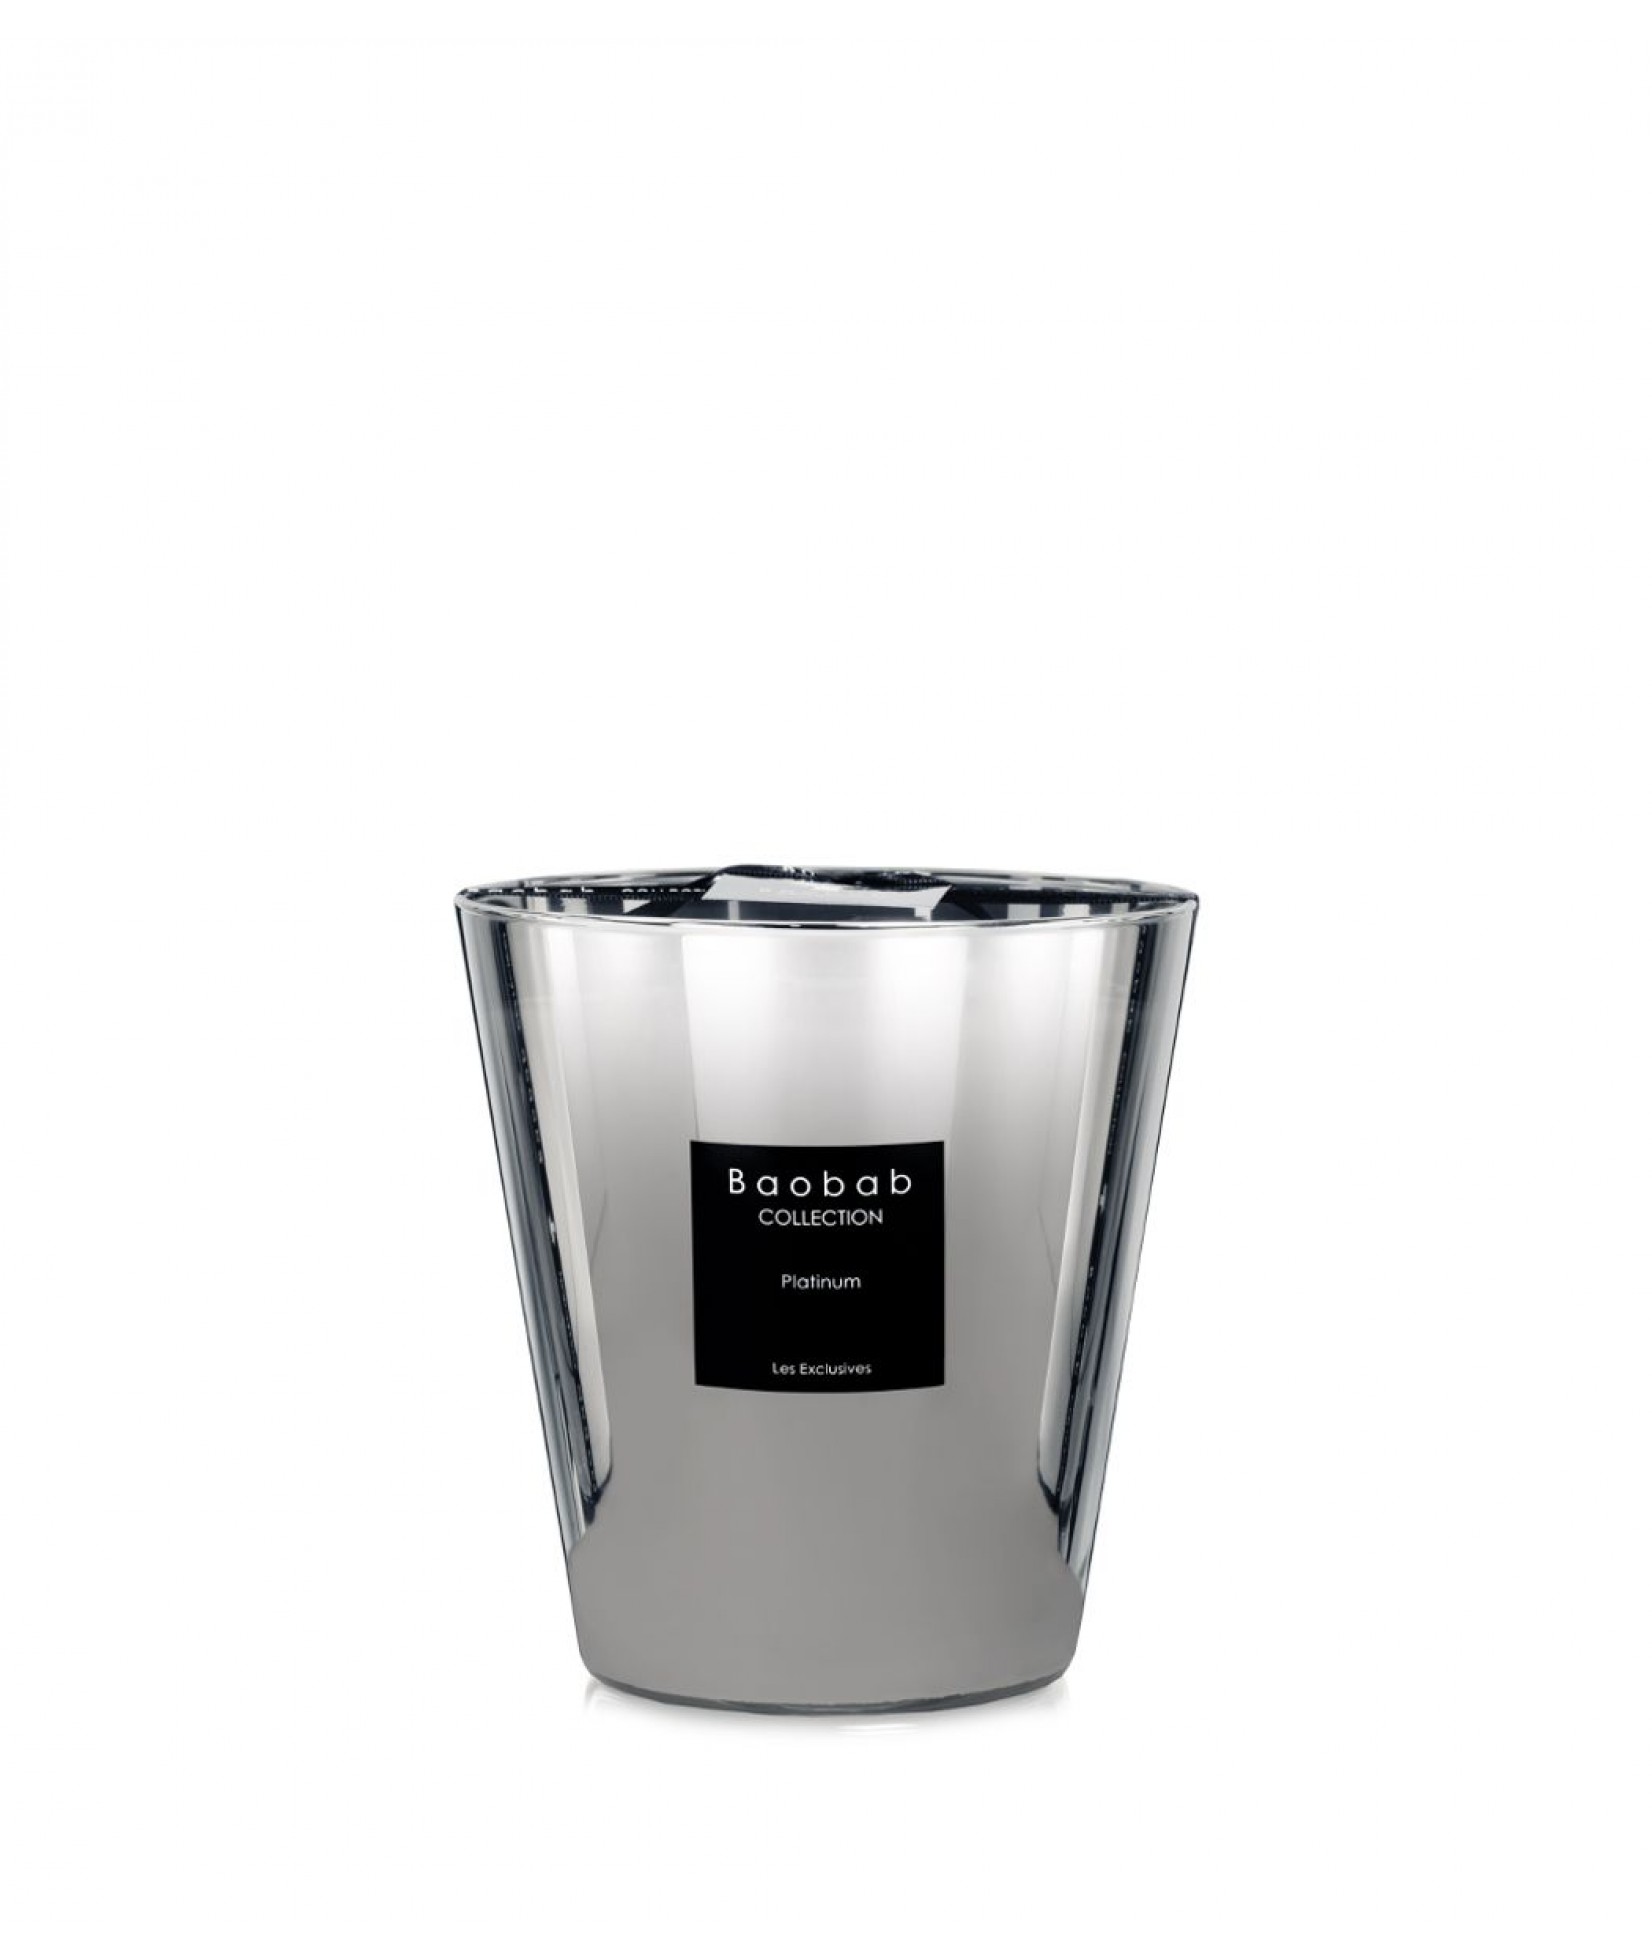 Baobap Scented Candle Platinum (Large)